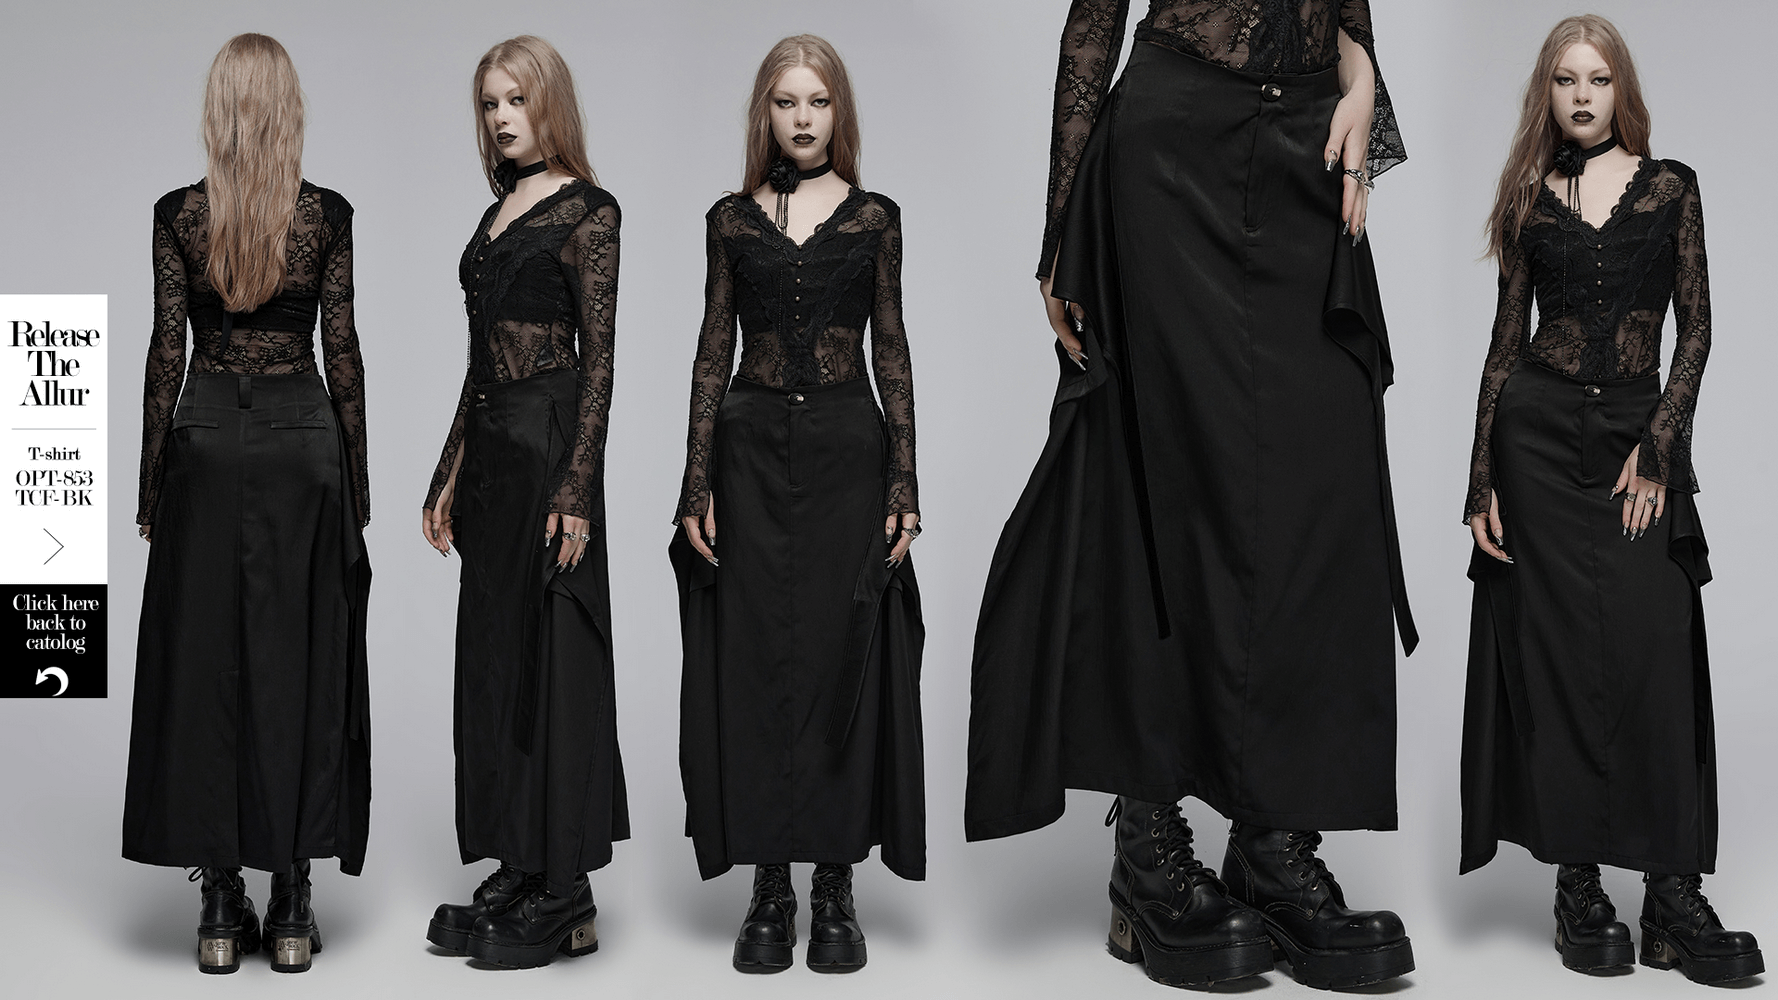 Victorian-Inspired Black A-Line Maxi Skirt with Pockets